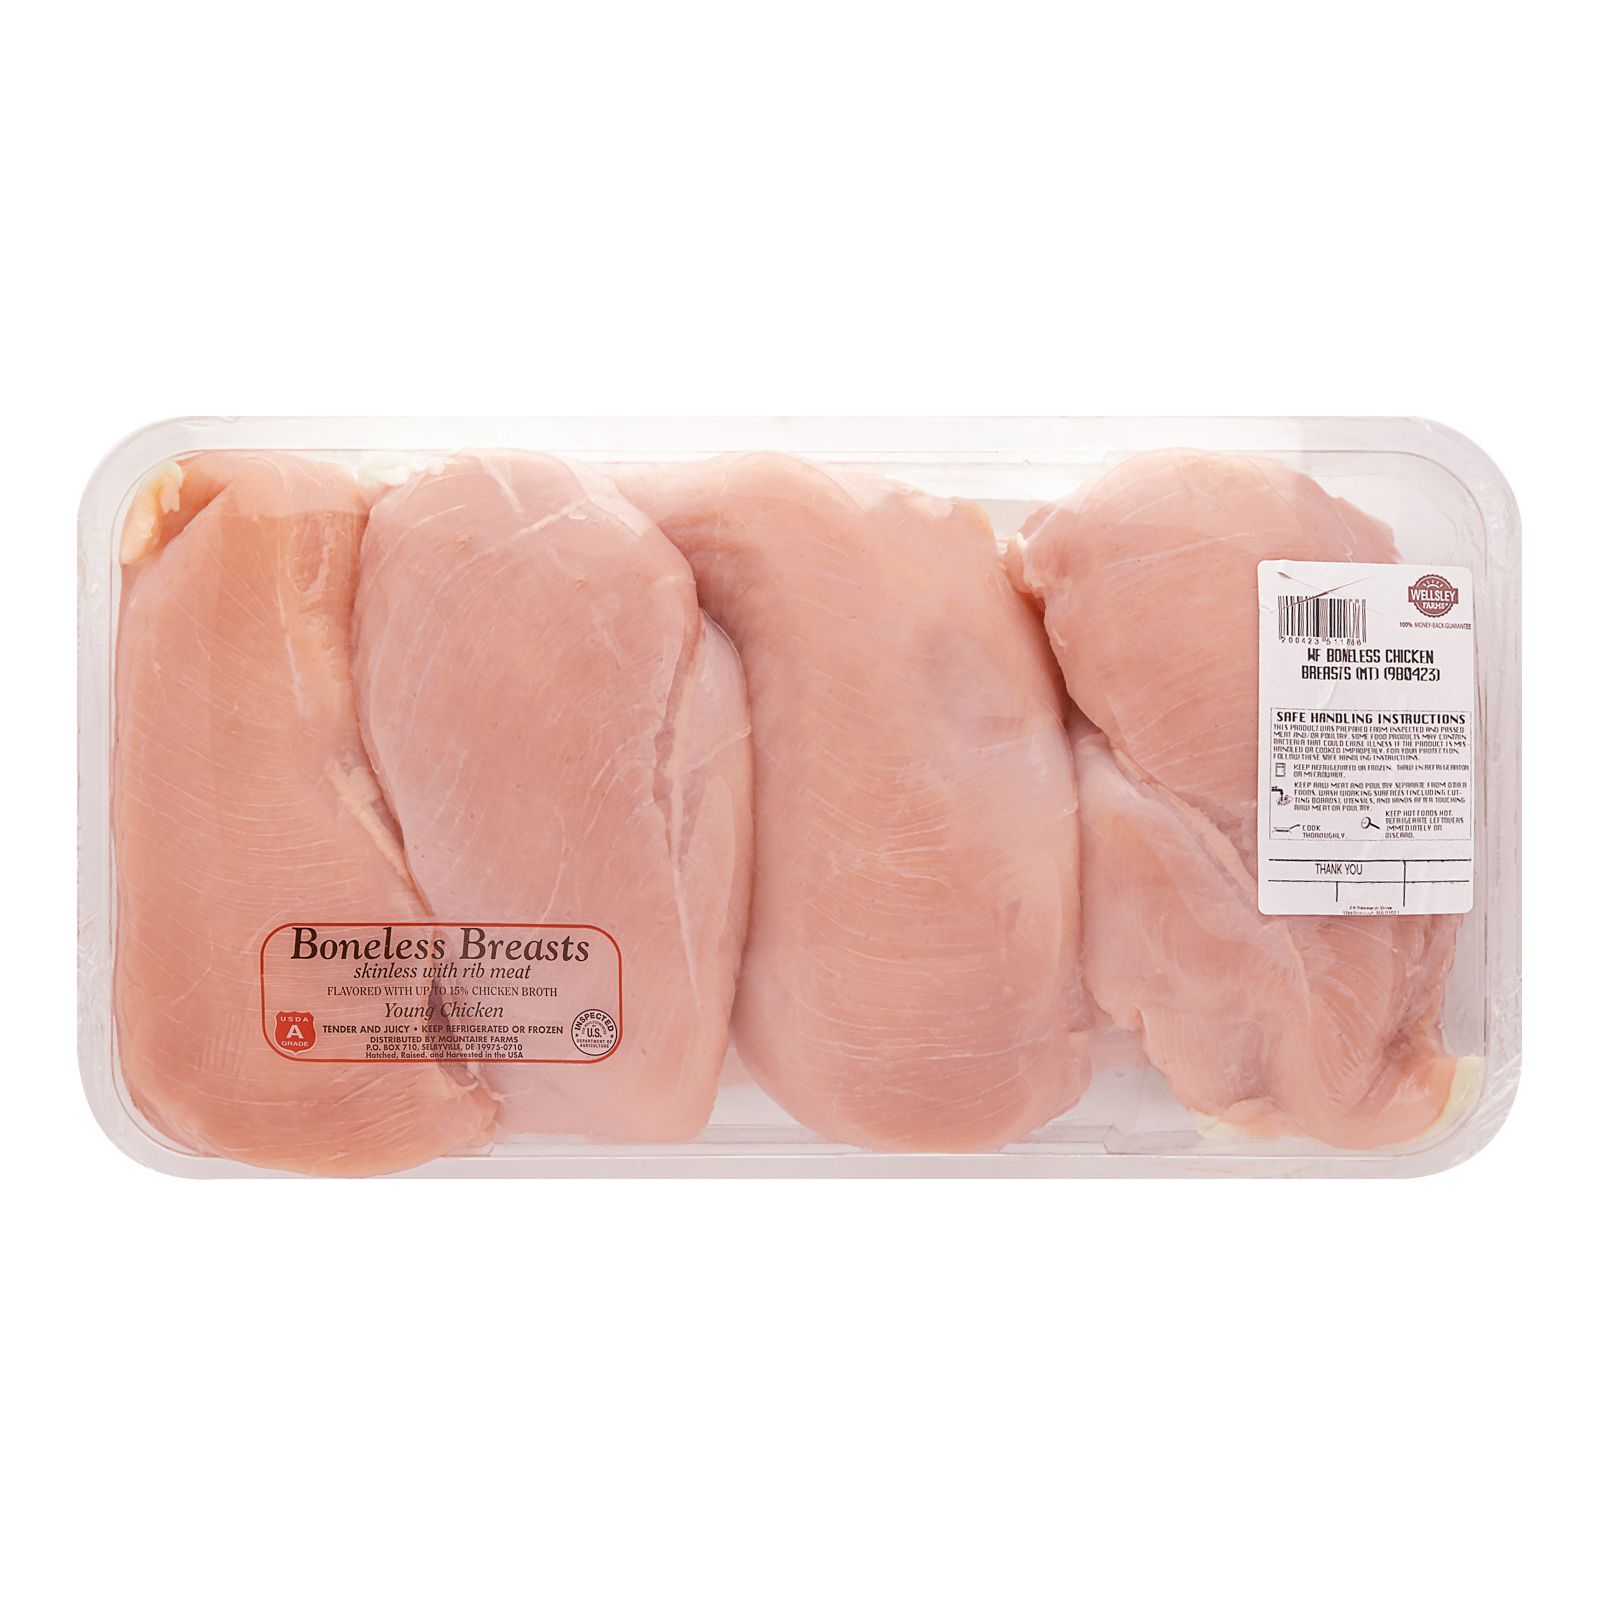 Perdue Harvestland Free Range Whole Chicken with Giblets, 4.25-6 lbs.